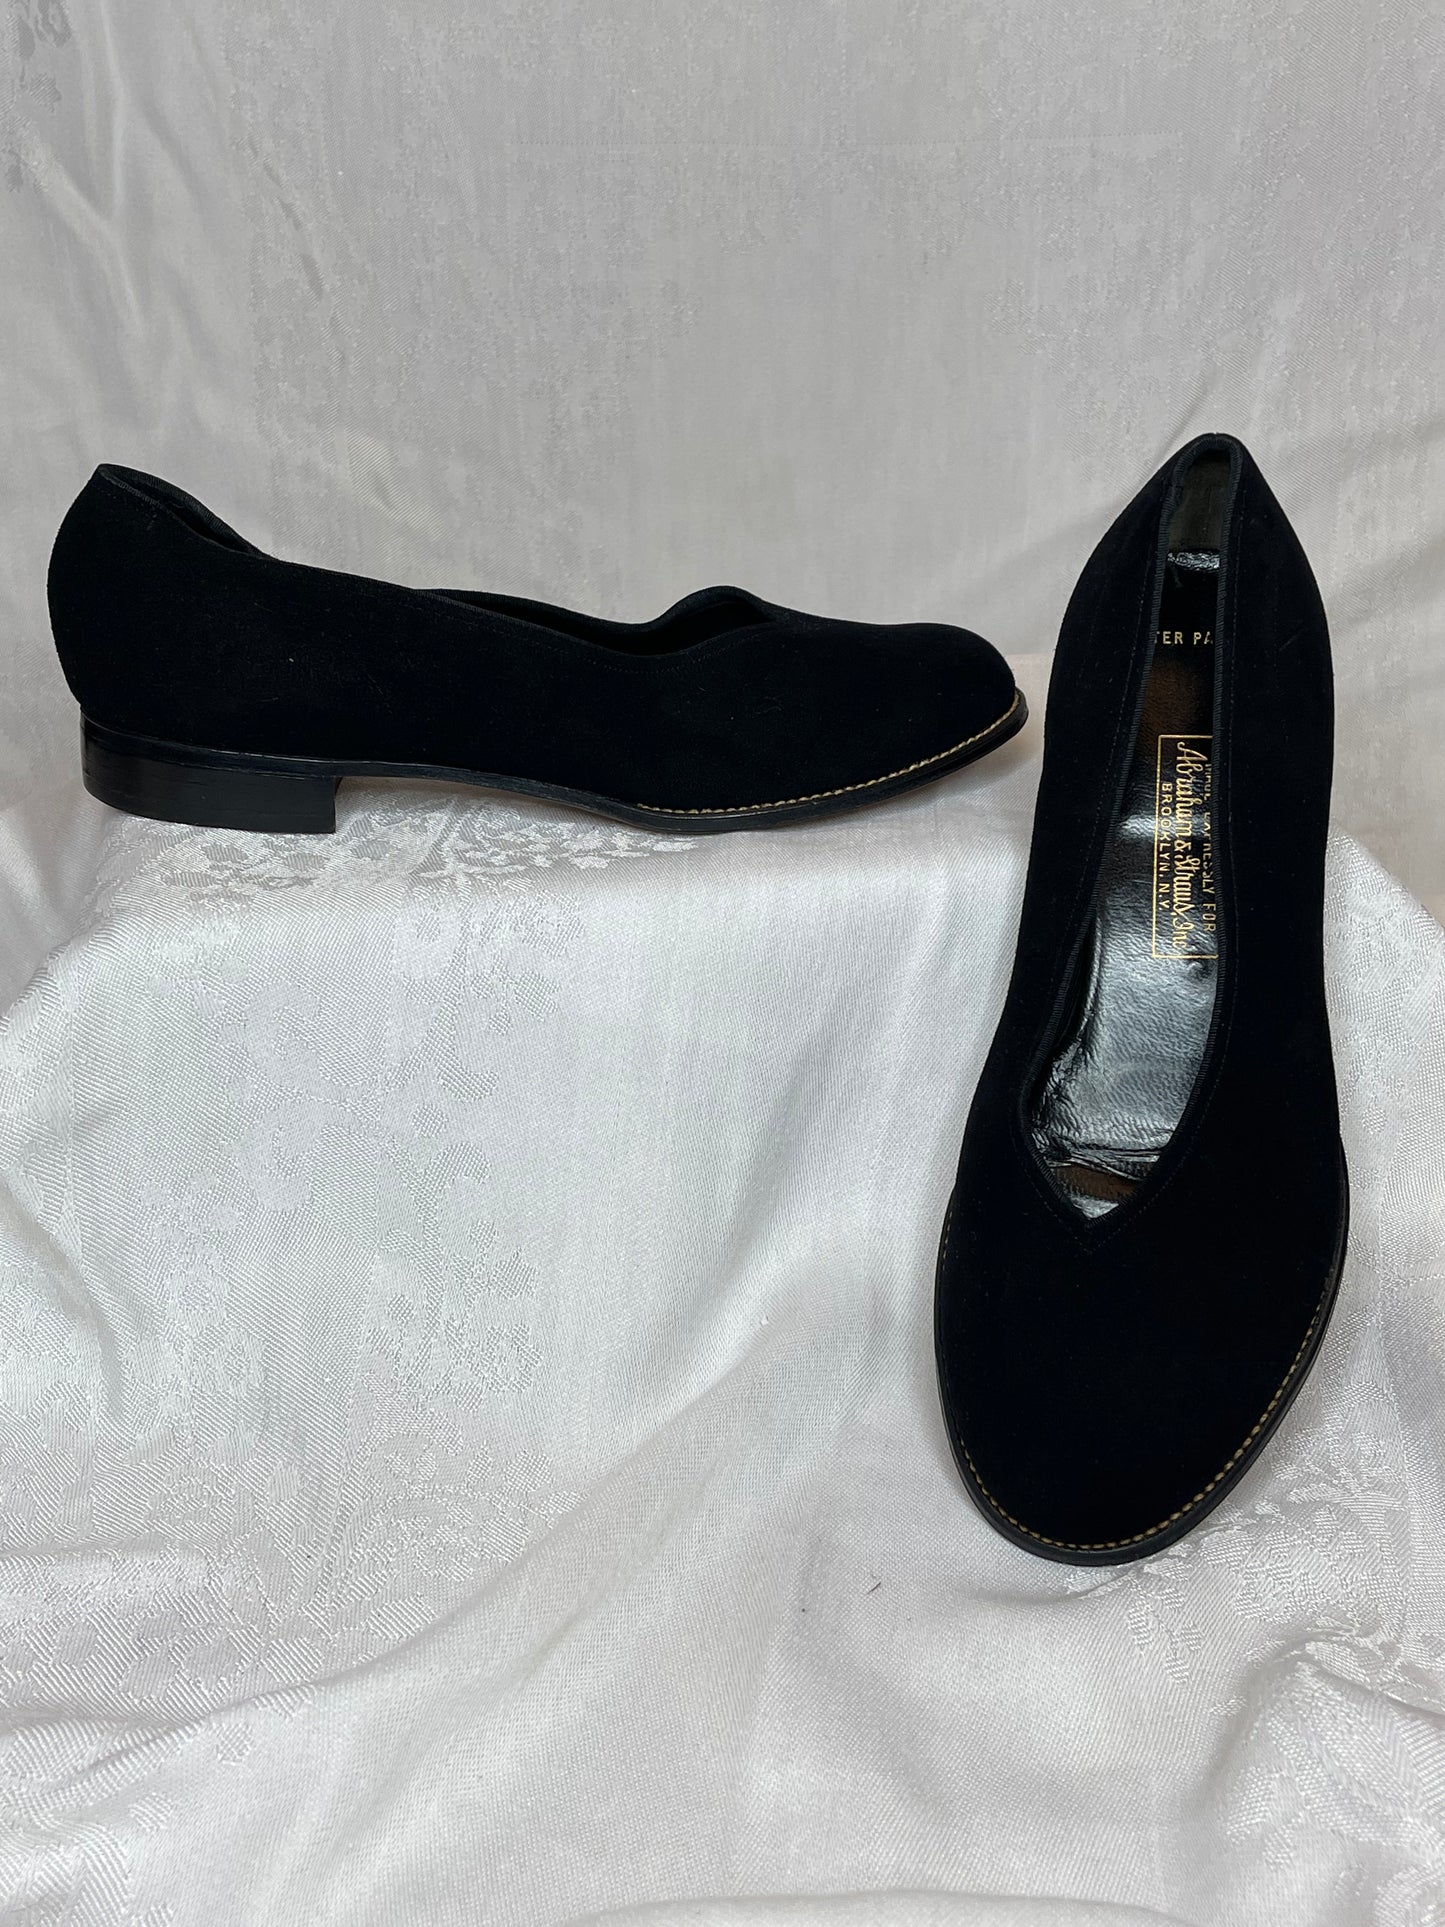 40s suede flats in like new condition